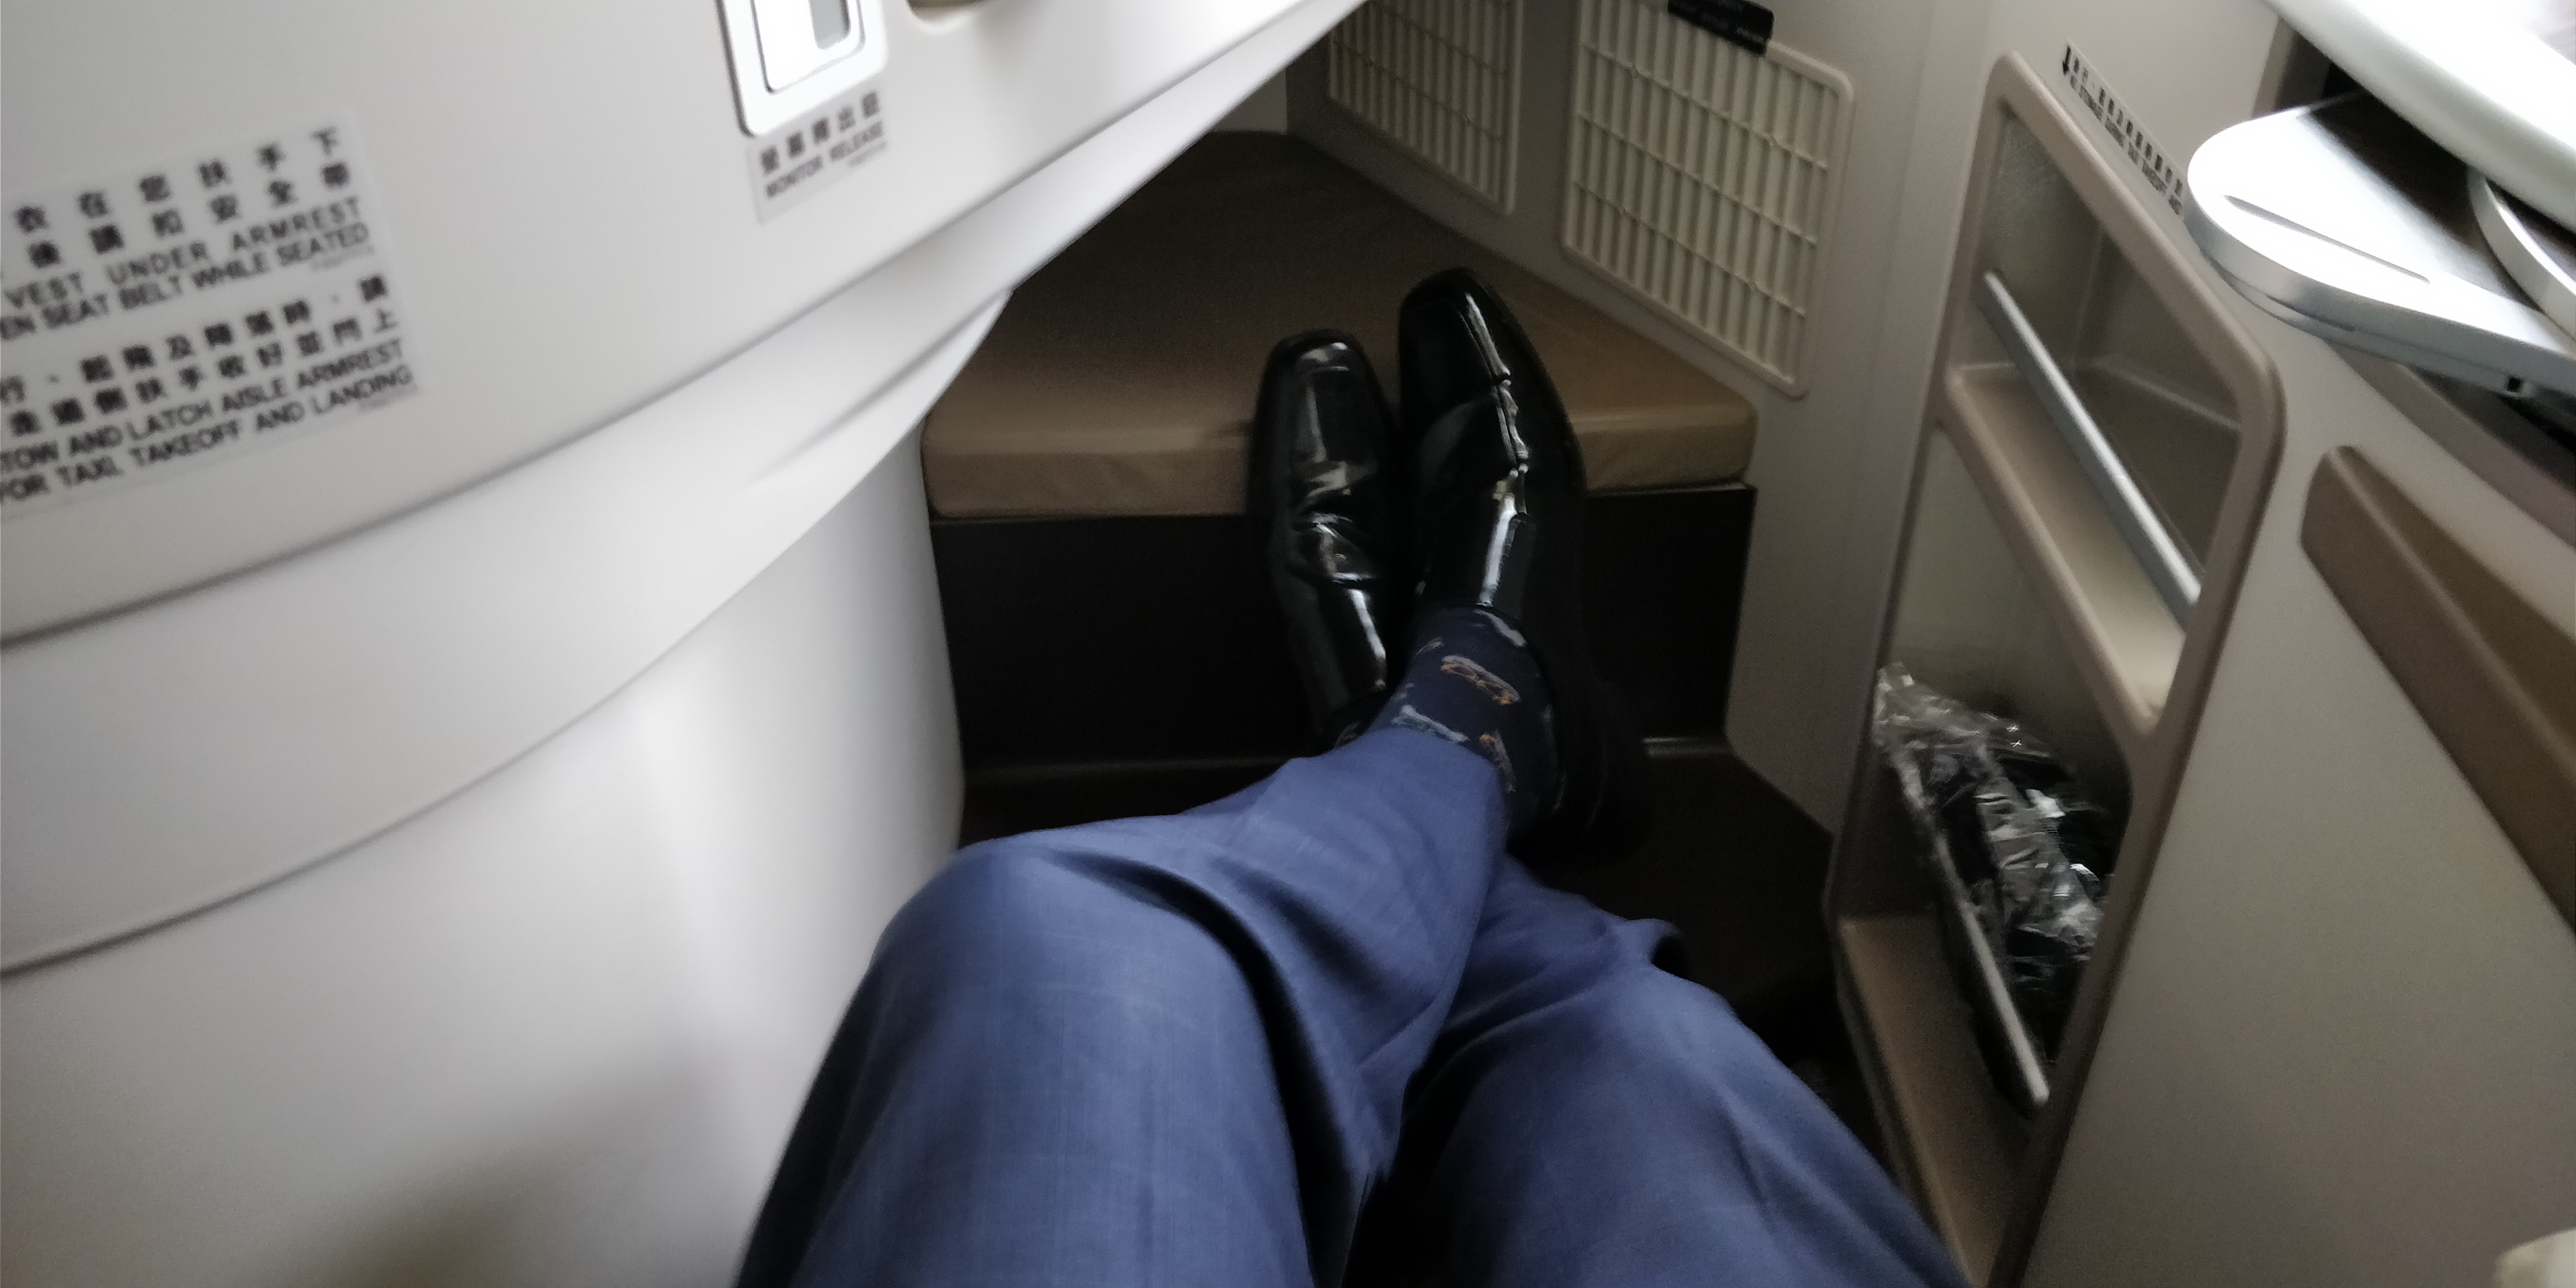 A PICTURE OF THE LEG ROOM SEAT 3K ROYAL LAUREL CLASS